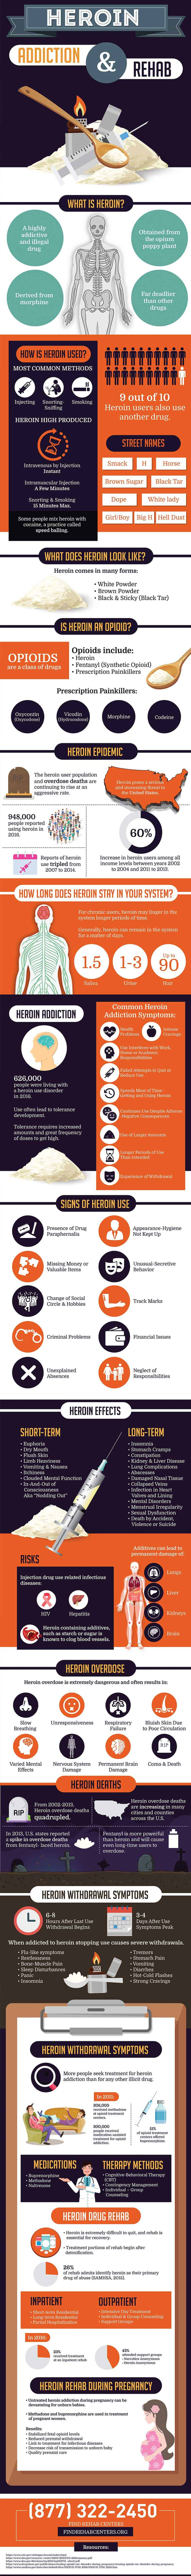 Heroin Addiction and Rehab Infographic